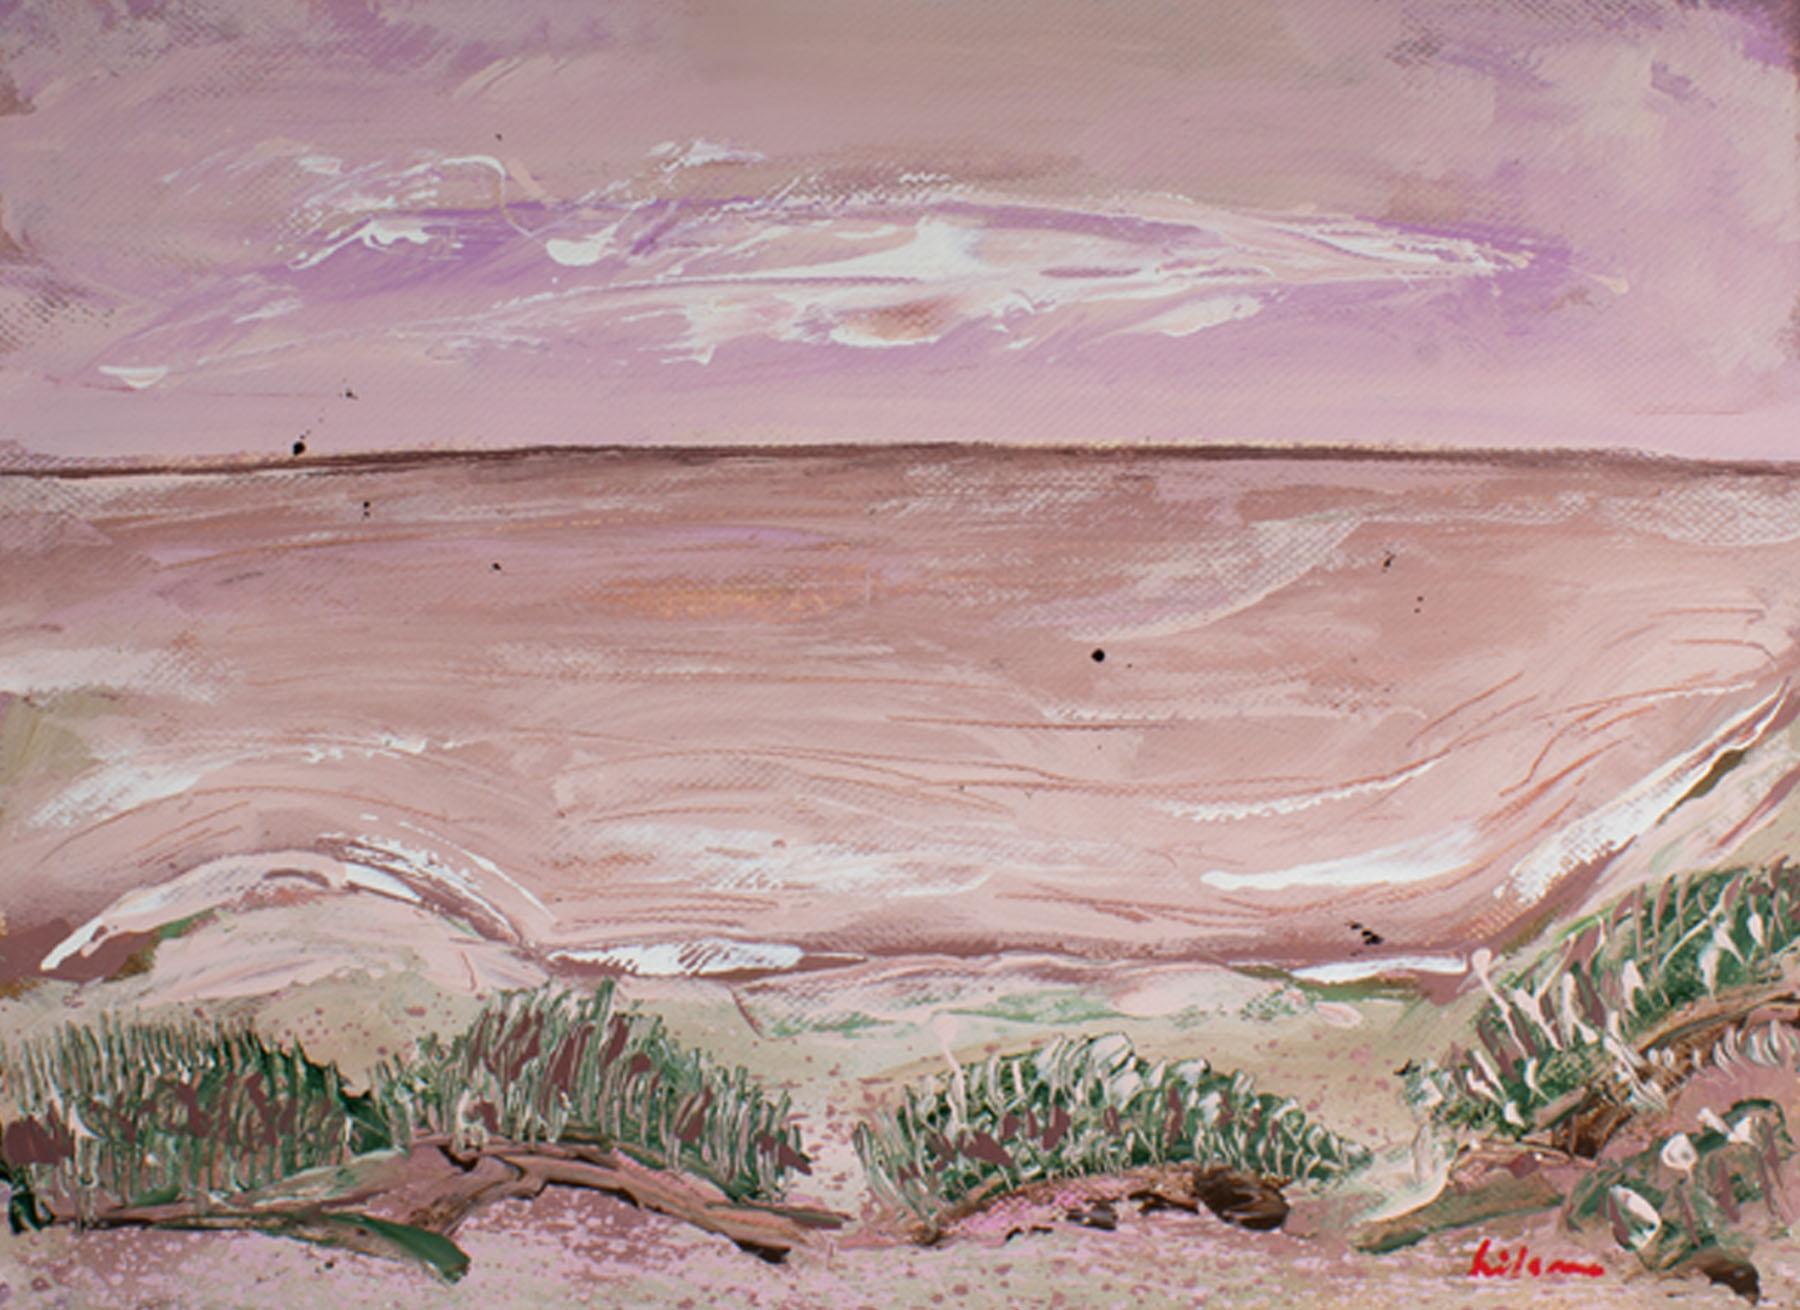 A 1980s abstract acrylic on paper beach landscape painting by American artist Harry Hilson (1935-2004). Gestural lines come together to create a vibrant pink shore with green shrubbery in the foreground. A pink and purple sunset is in the